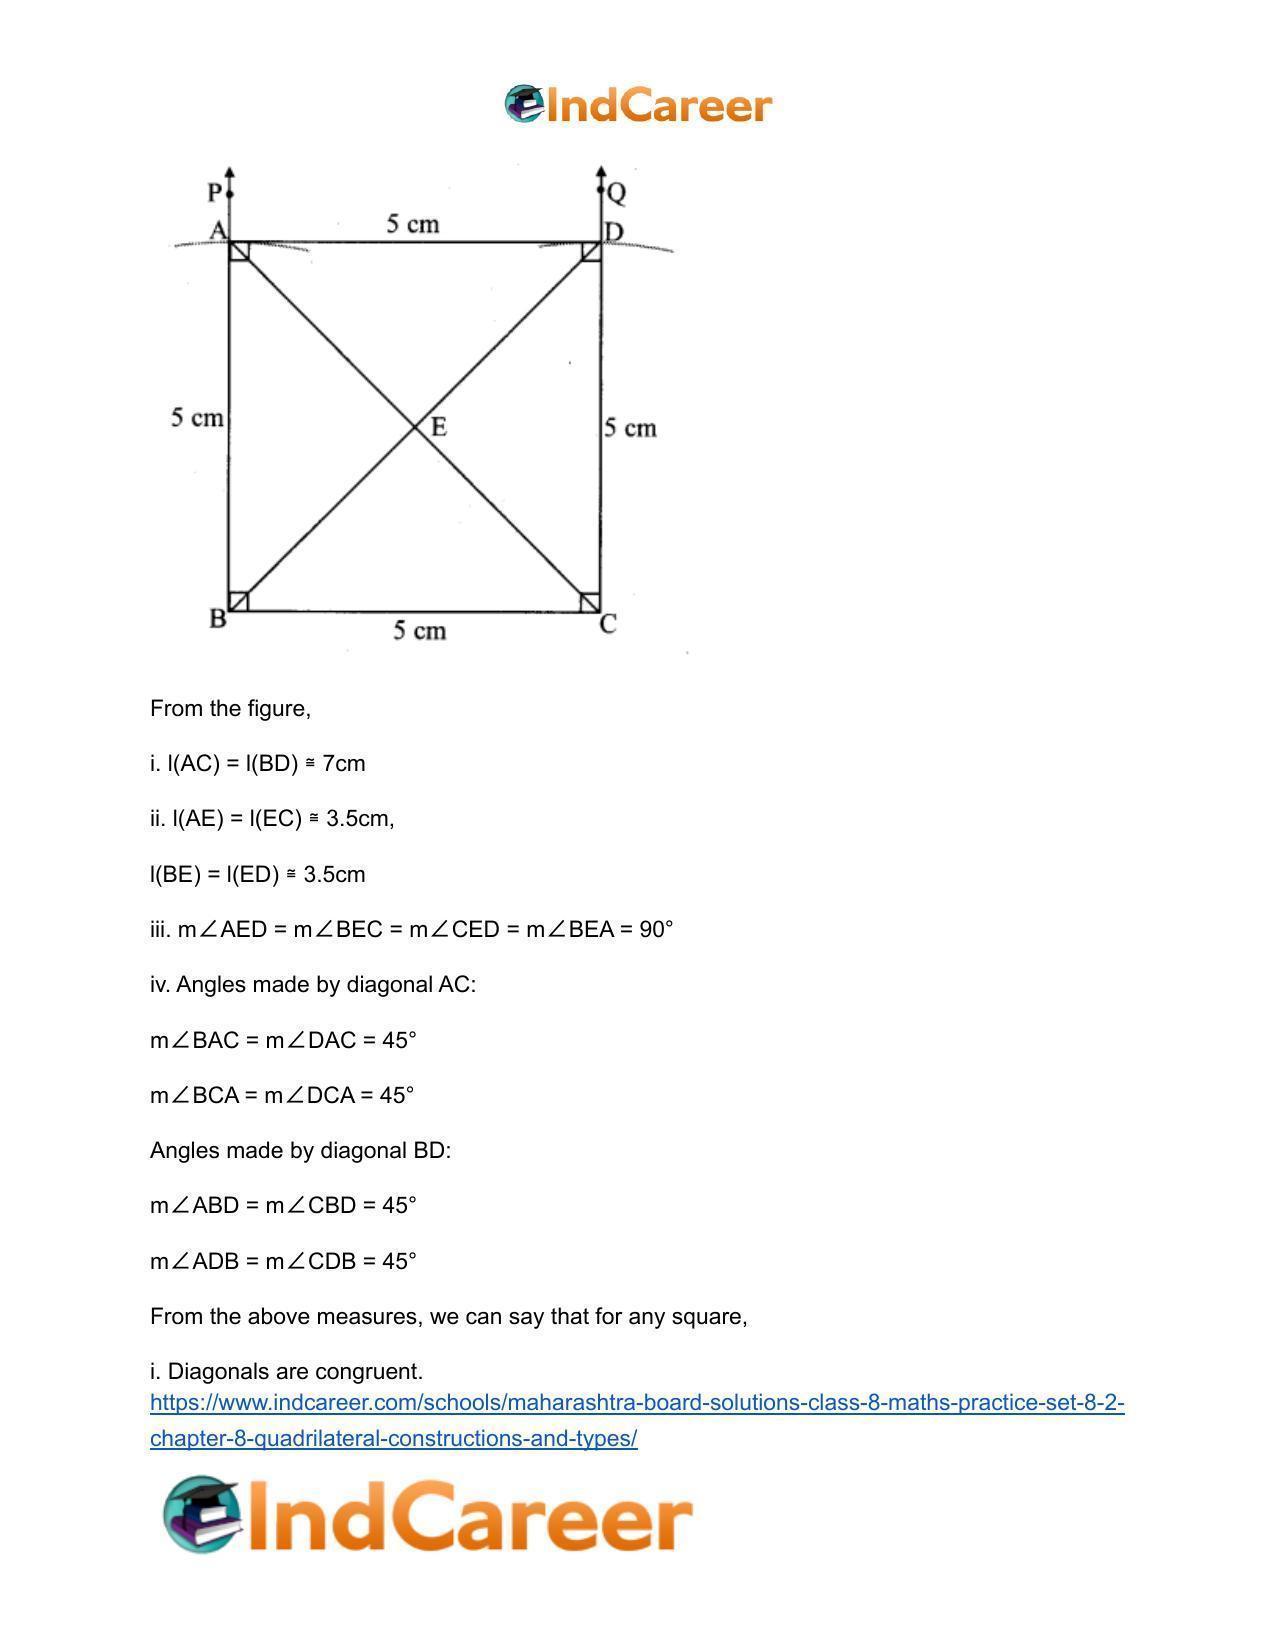 Maharashtra Board Solutions Class 8-Maths (Practice Set 8.2): Chapter 8- Quadrilateral: Constructions and Types - Page 14